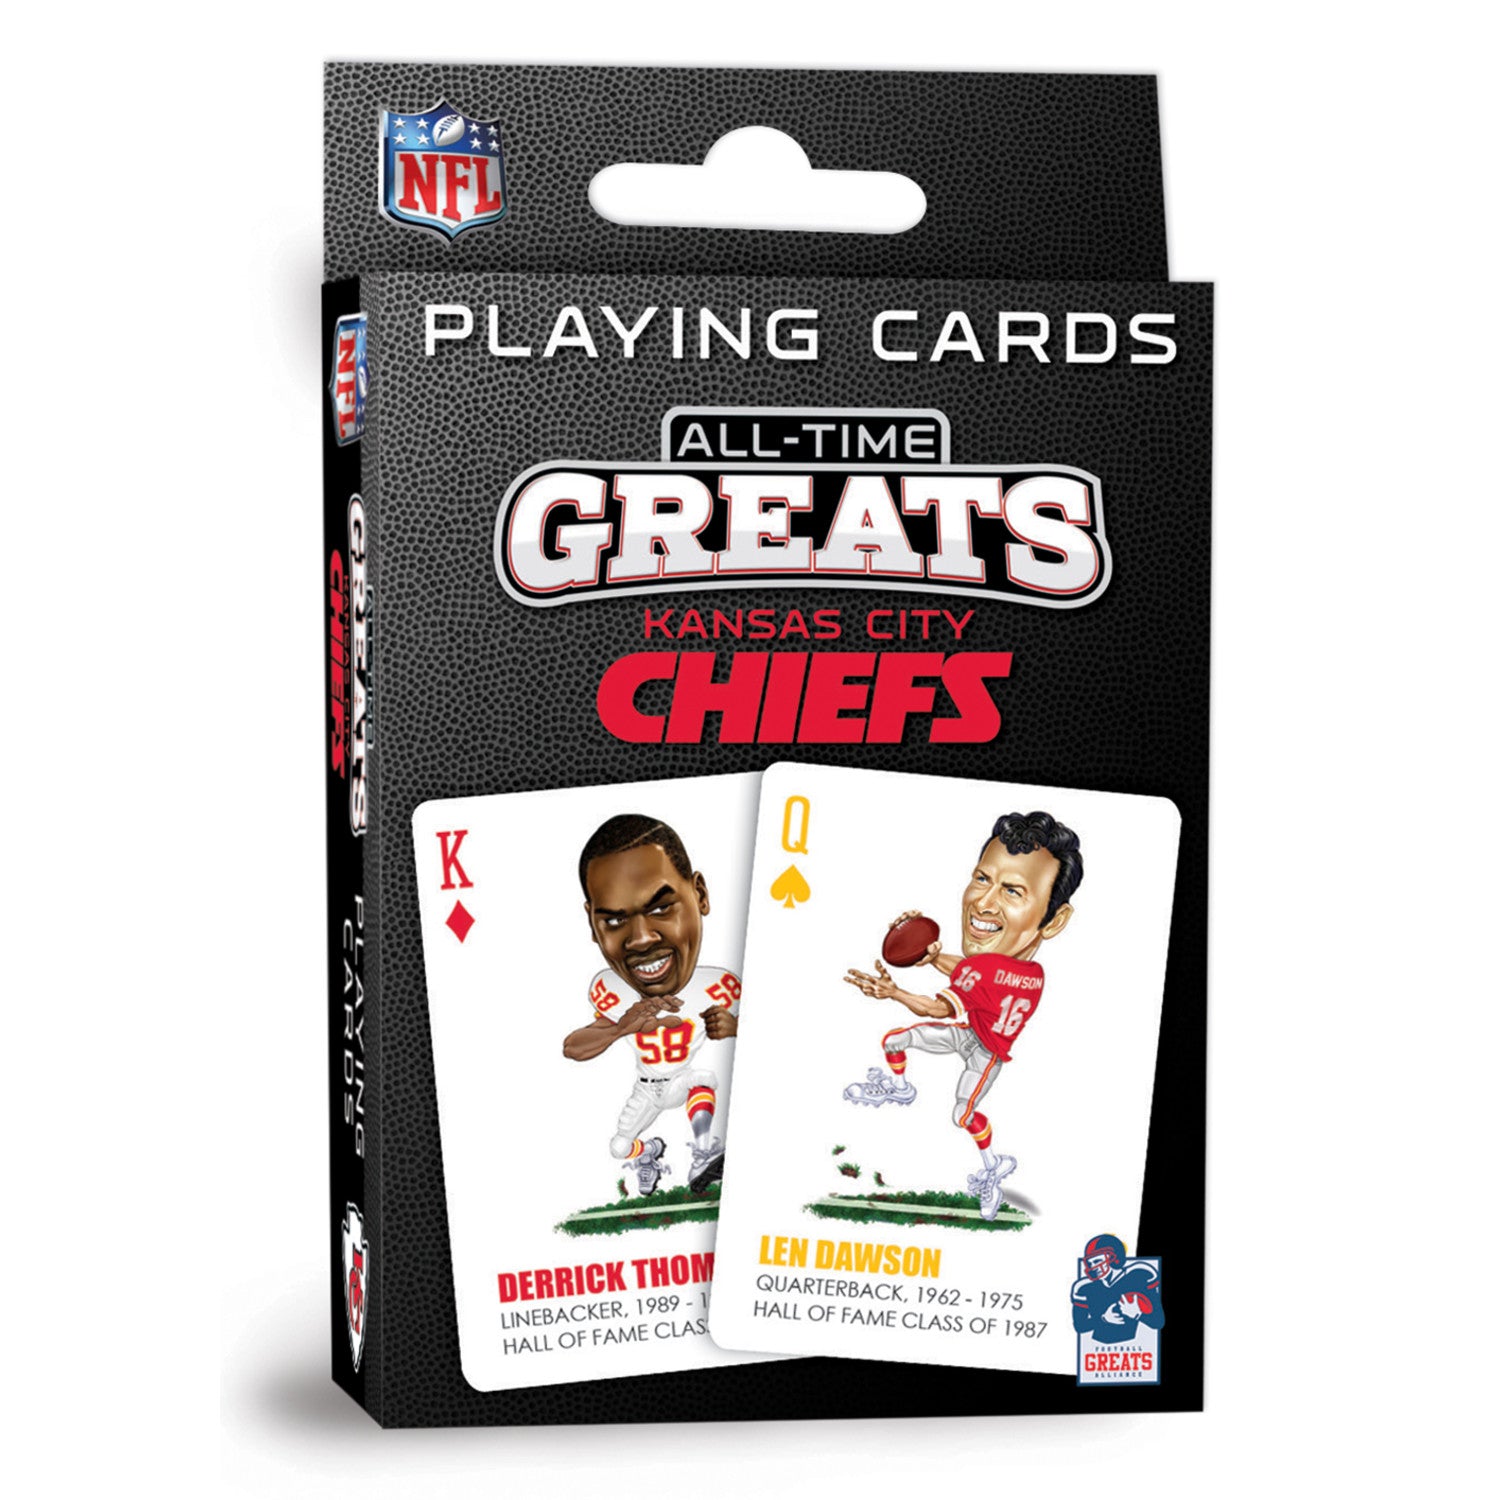 Kansas City Chiefs All-Time Greats Playing Cards - 54 Card Deck